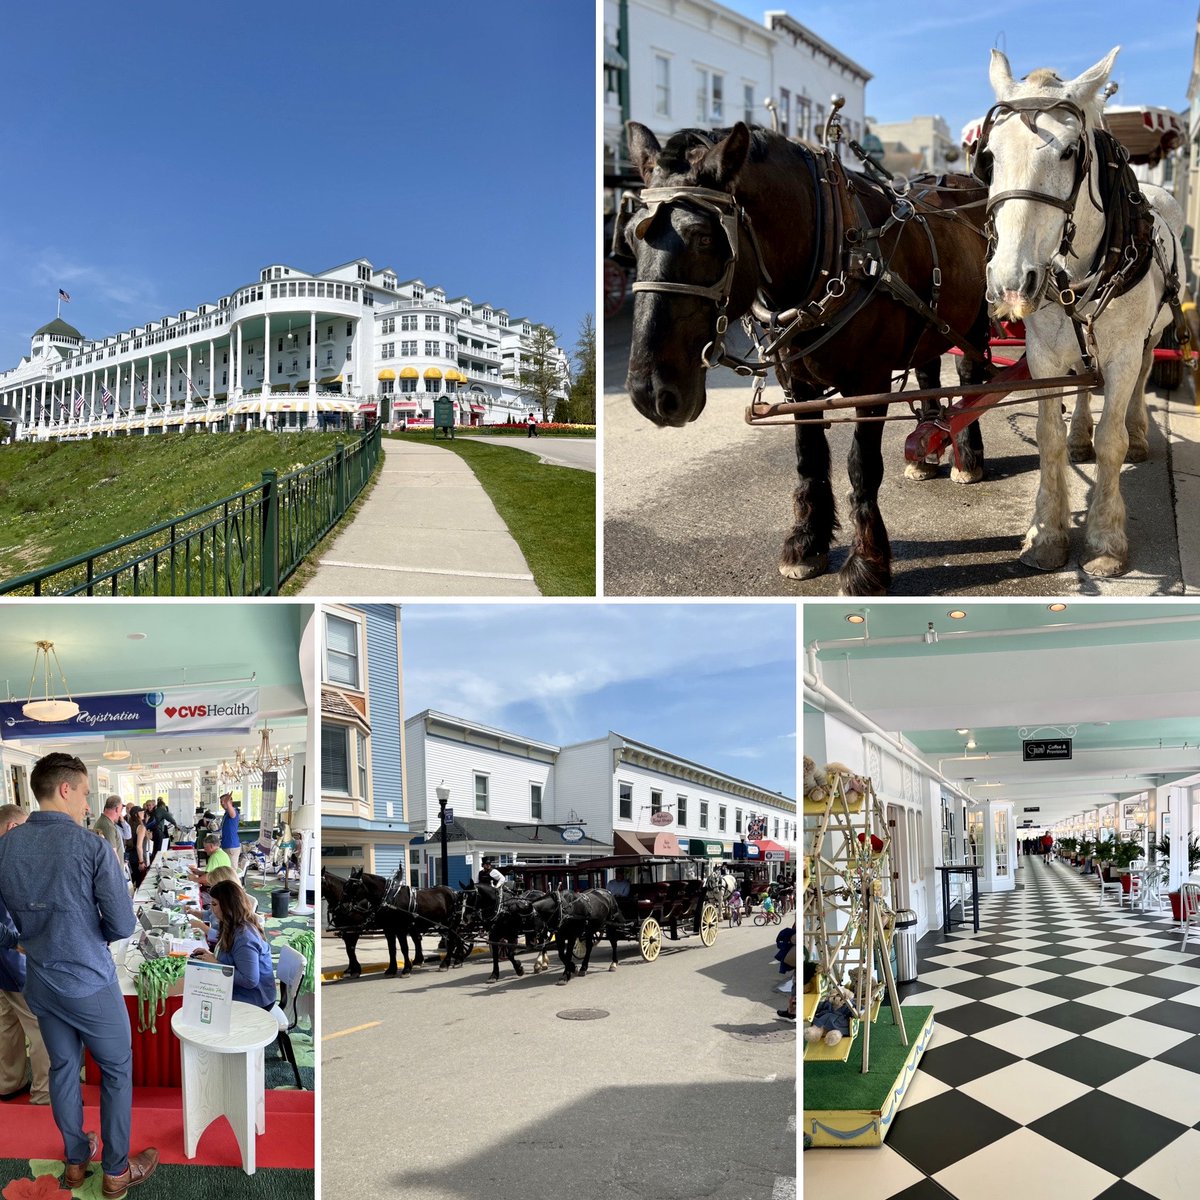 Excited to be on #mackinacisland for #MPC22, Mackinac Policy Conference representing ⁦@GordieHoweBrg⁩ along with ⁦@WDBA_CEO⁩ and @jabbour3